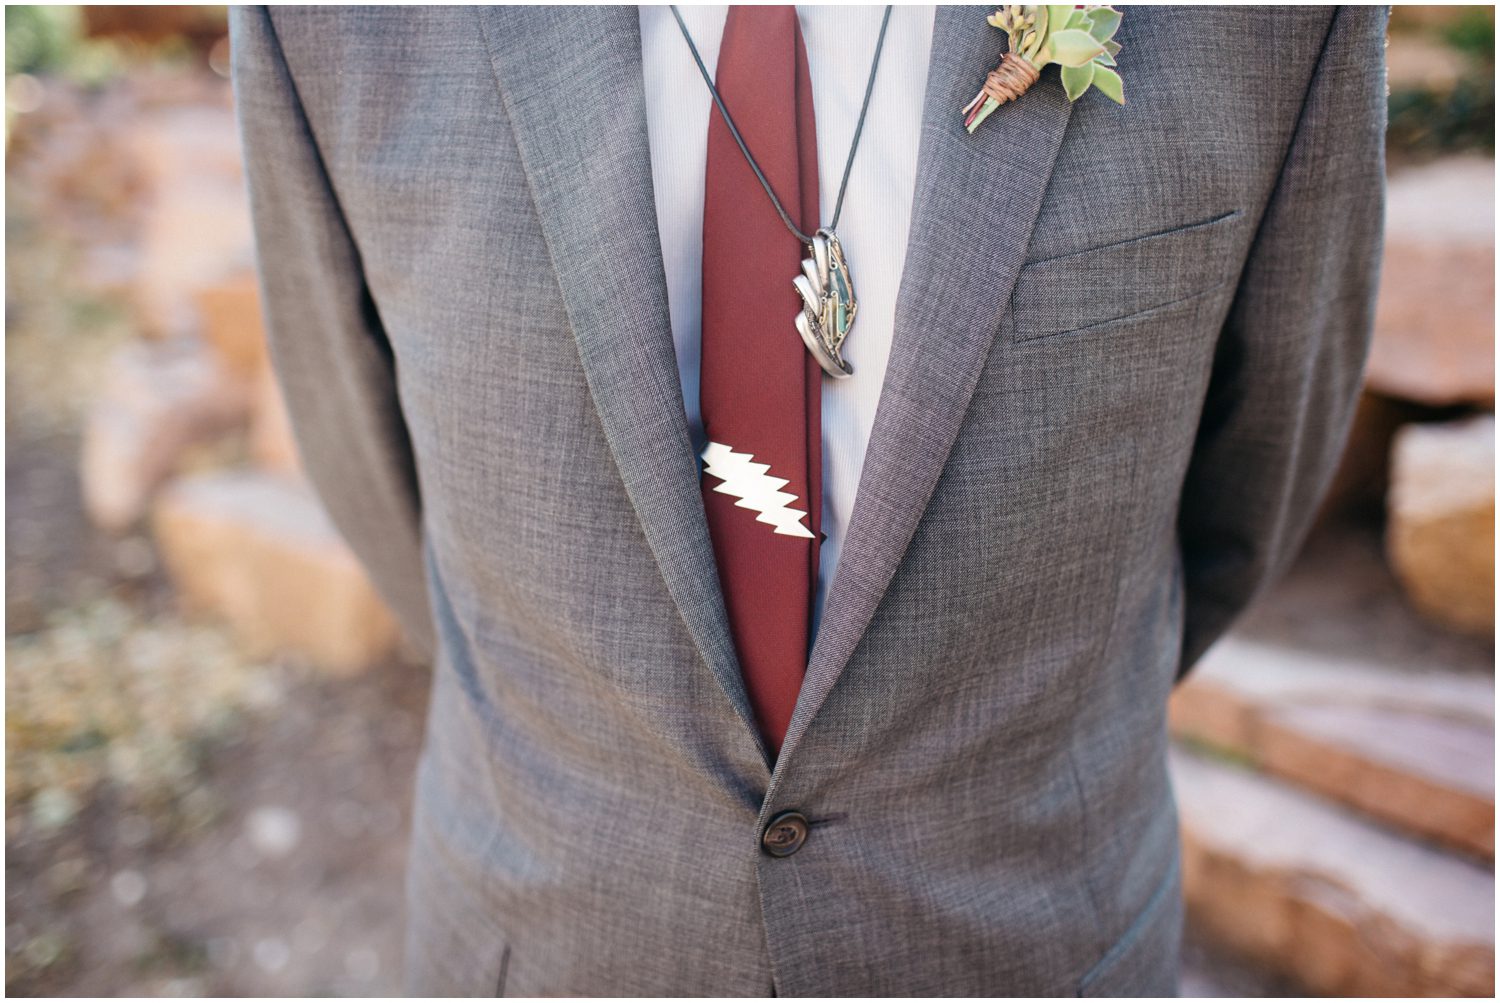 Groom gift, gift for groom on wedding day, Groom tie clip, Lightning bolt tie clip, Boutinierre, Planet Bluegrass Wedding, Lyons Colorado Wedding, Lace and Lillies, Colorado Wedding Photographer, A Spice of Life, Boho Wedding Inspiration, Burgundy wedding inspiration, Colorado Wedding